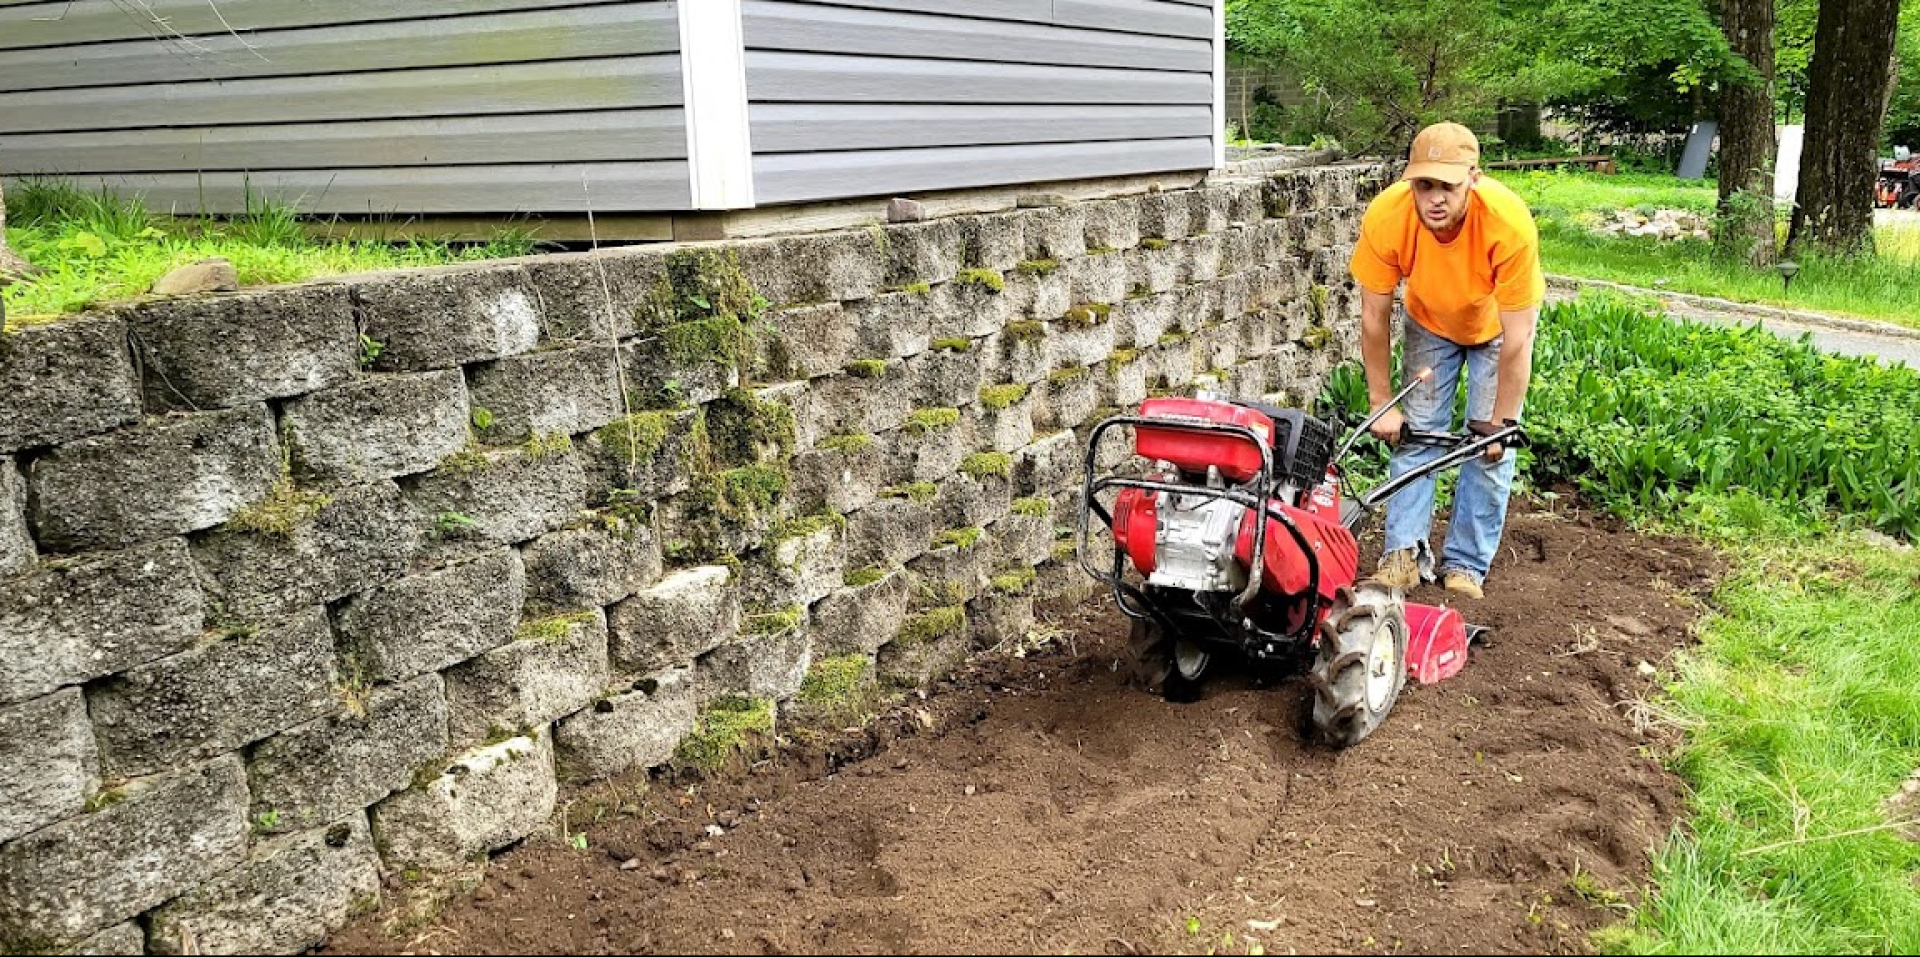 A man in an orange shirt tilling dirt with a red machine alongside a retaining wall made of stacked gray bricks